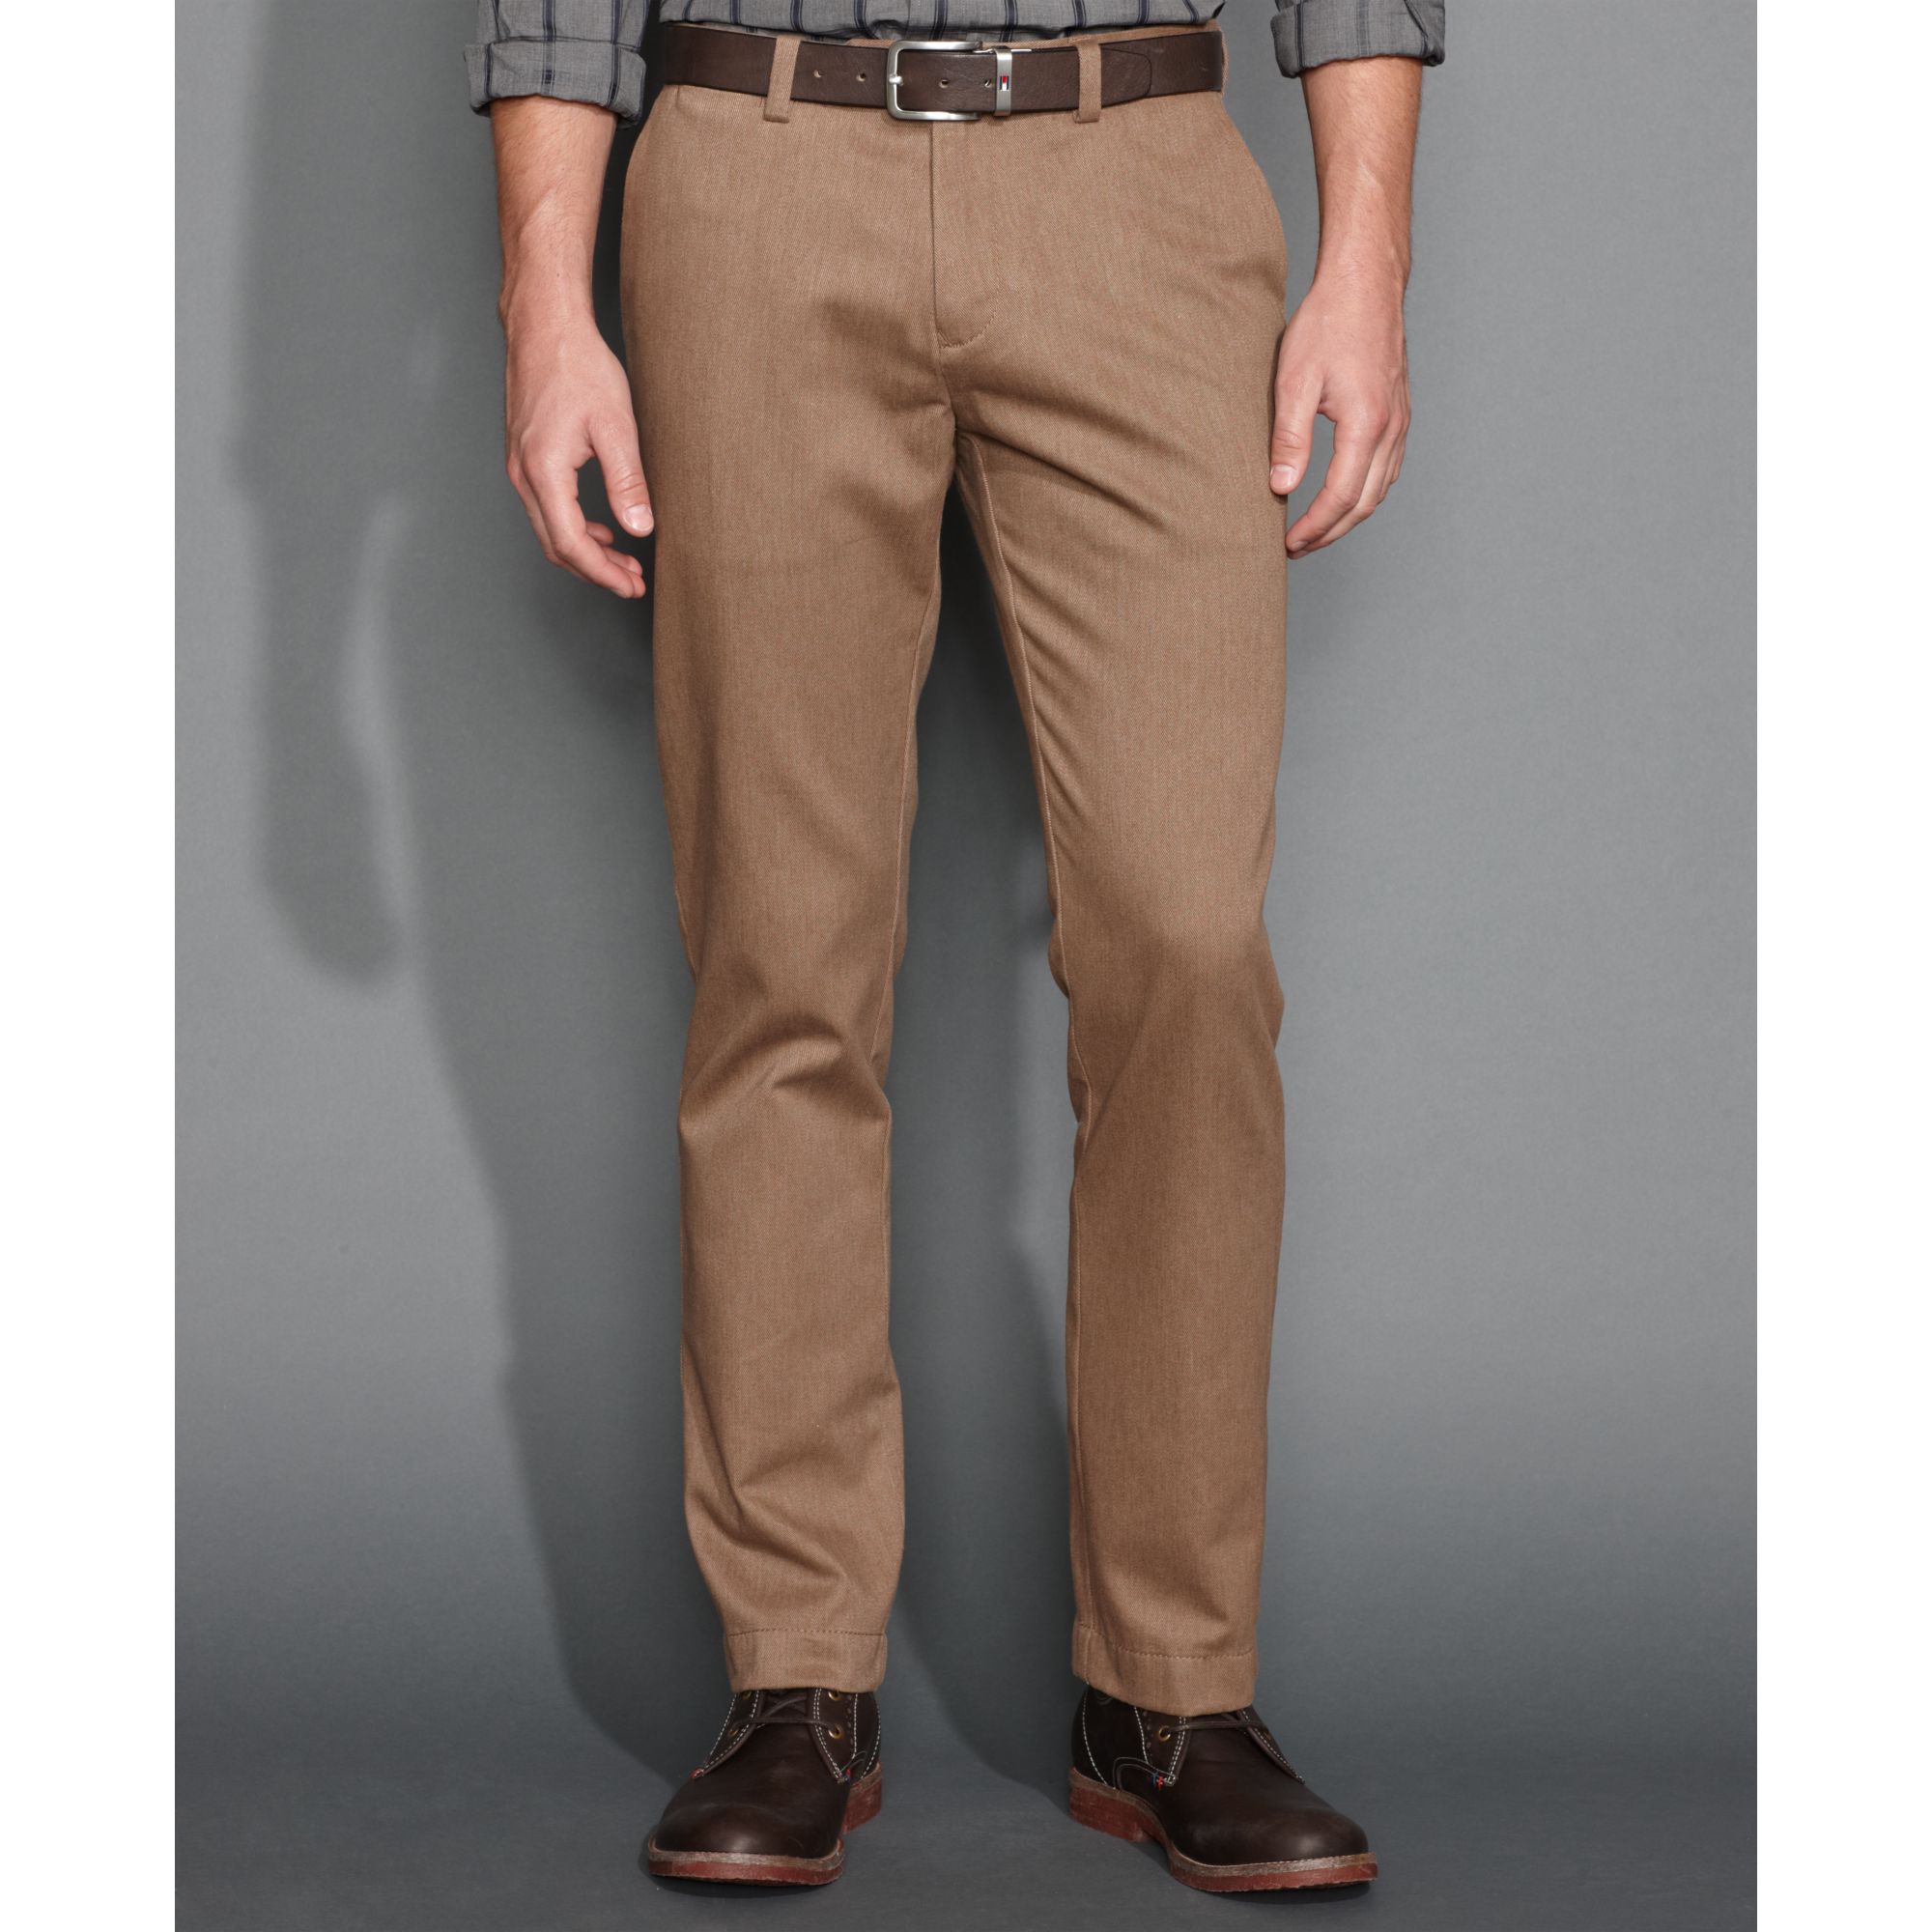 Lyst - Tommy hilfiger University Brushed Twill Chino in Natural for Men